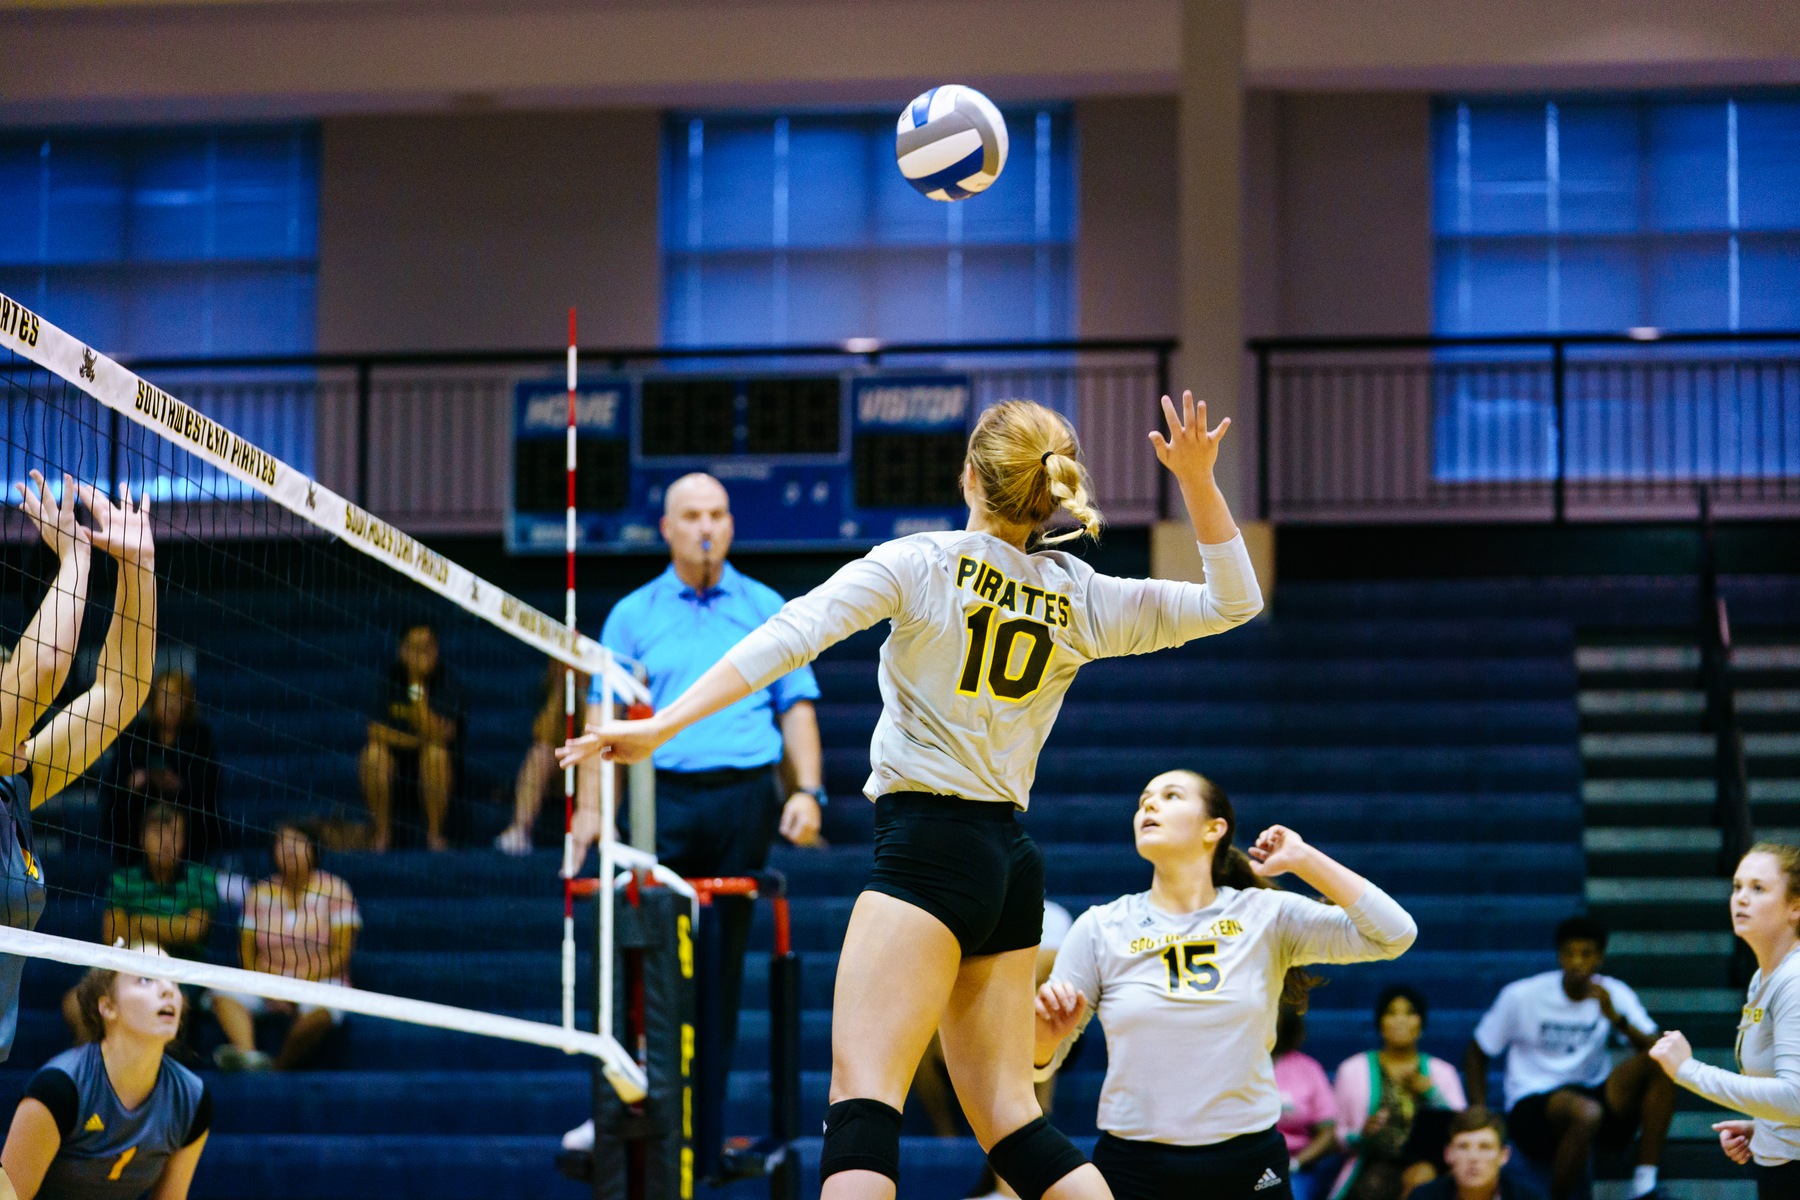 Pirates Fall in Five Sets to Mary Hardin-Baylor